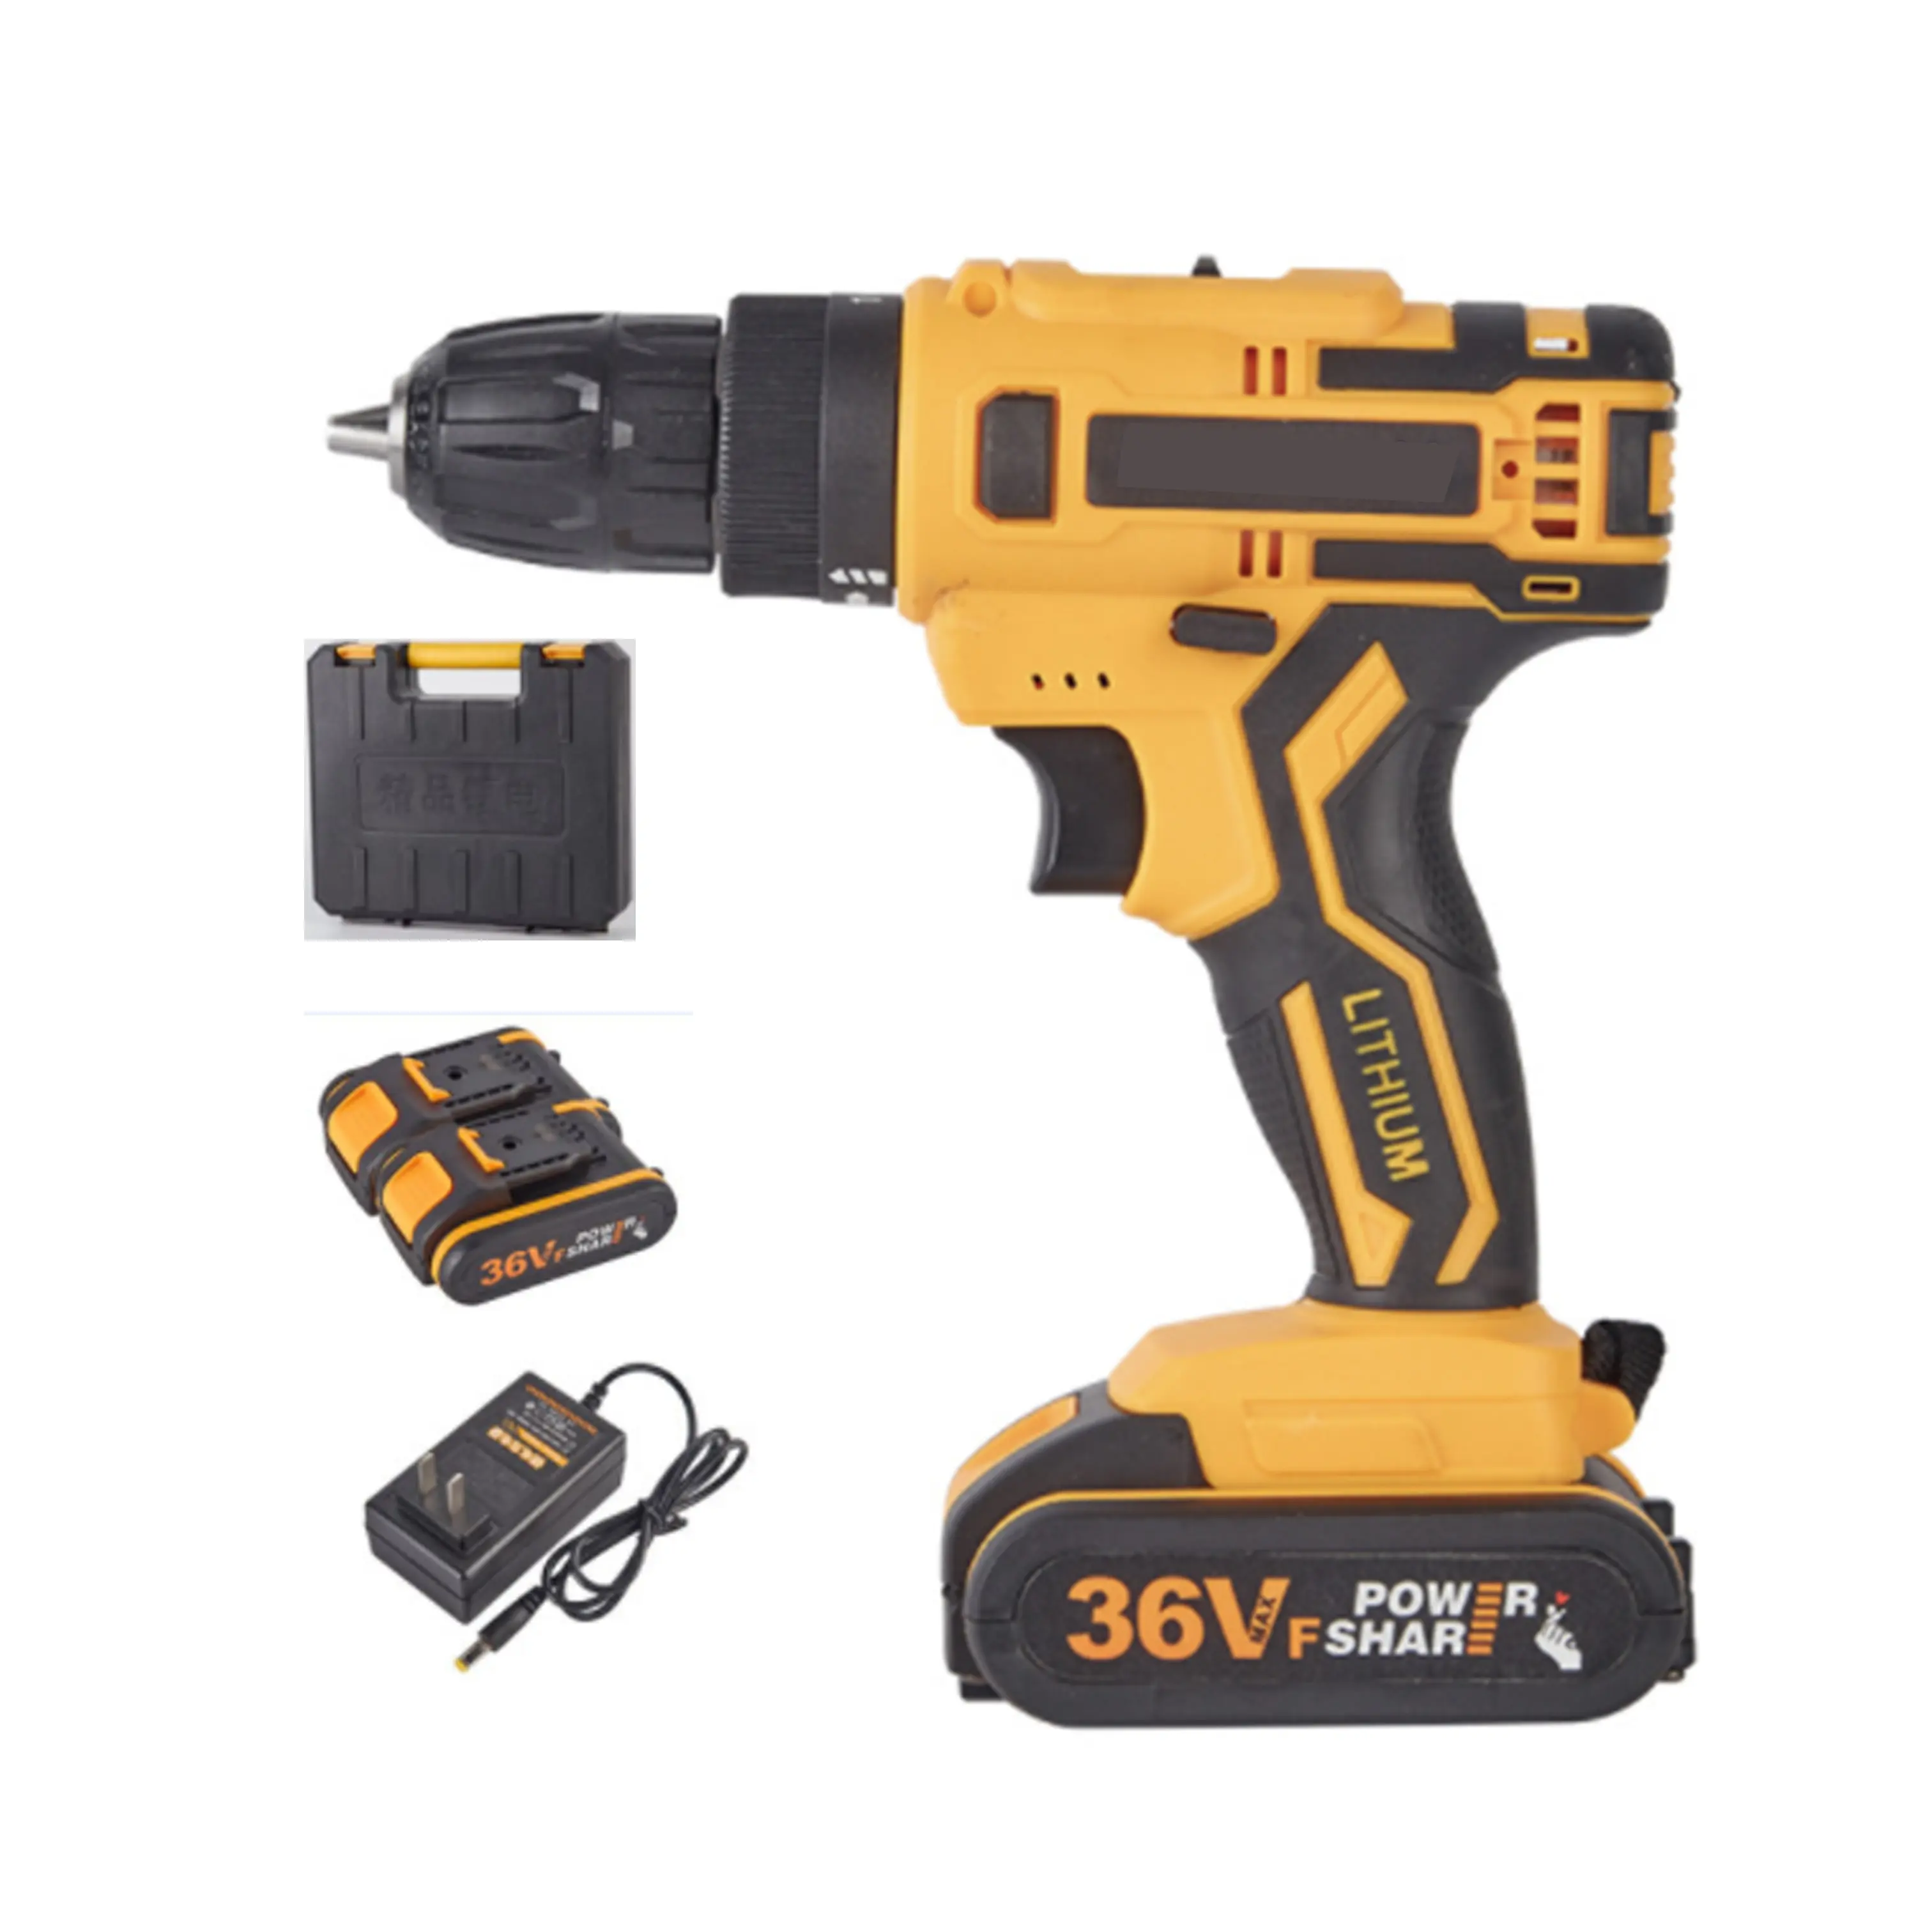 21v the best battery cordless electric drill power drilling machines brushless drill tools combo set